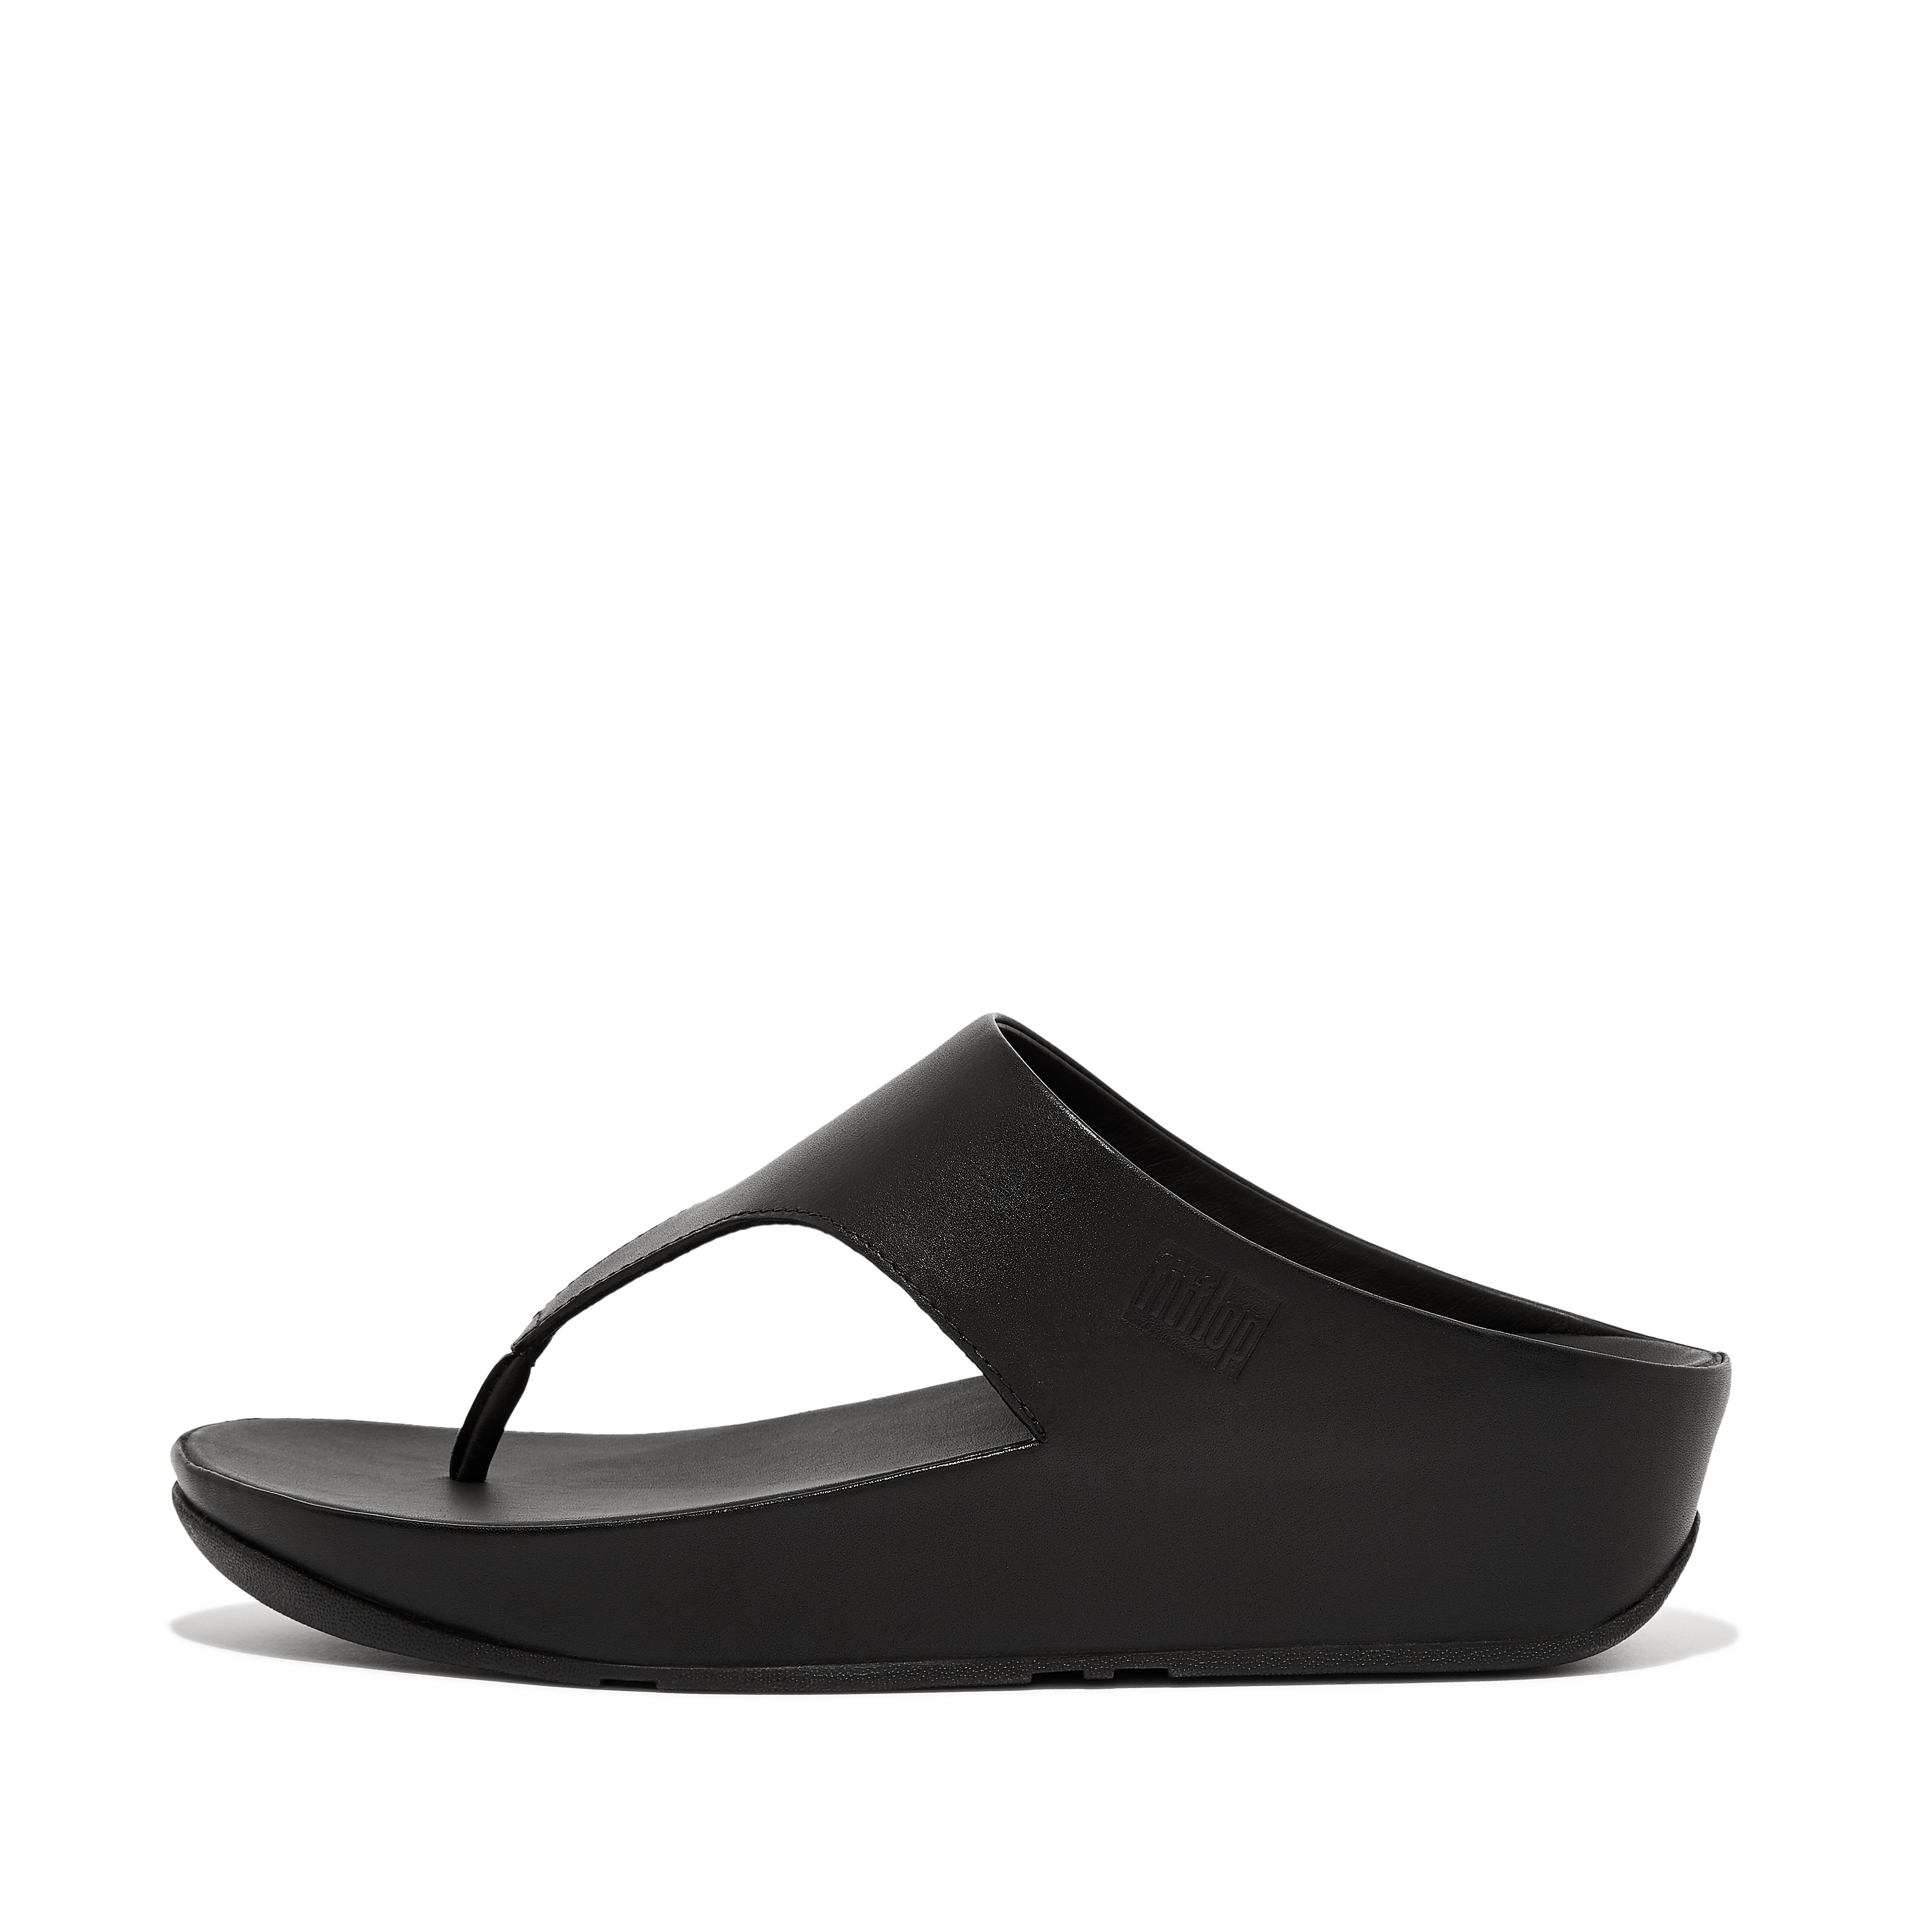 Women's Shuv Leather Toe Post Sandals | FitFlop US